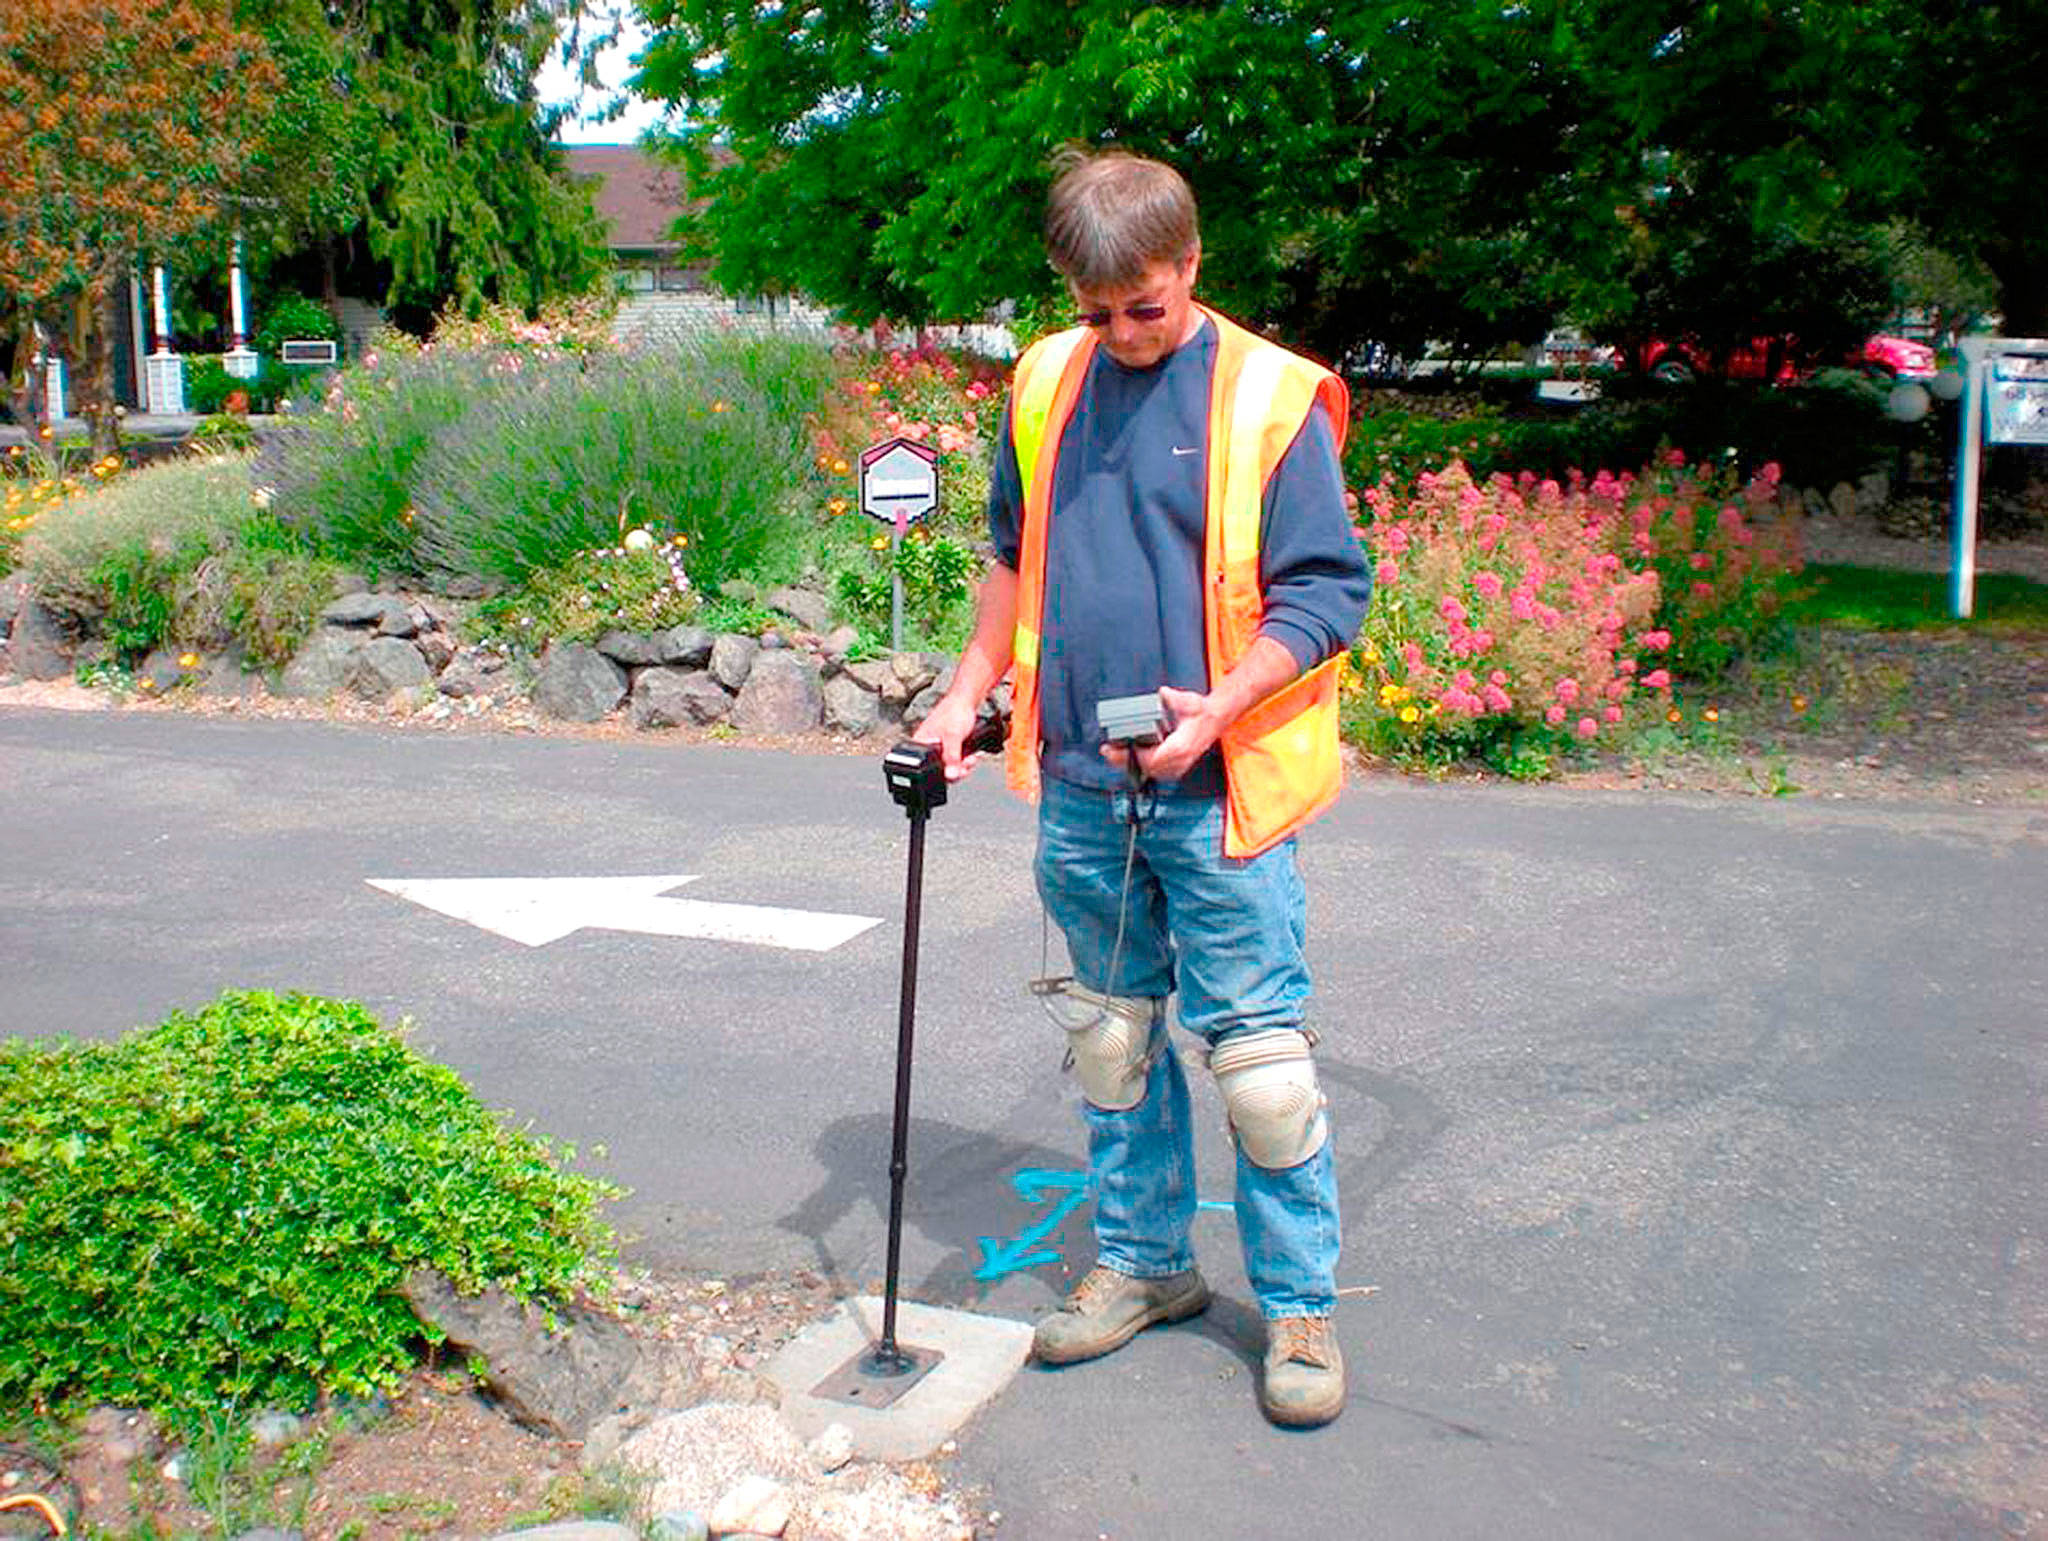 Kevin Hergert with the City of Sequim’s Public Works Department checks a meter at a local business. In 2018, qualifications for utility discounts are changing for low income households that qualify. Photo Barbara Hanna/City of Sequim